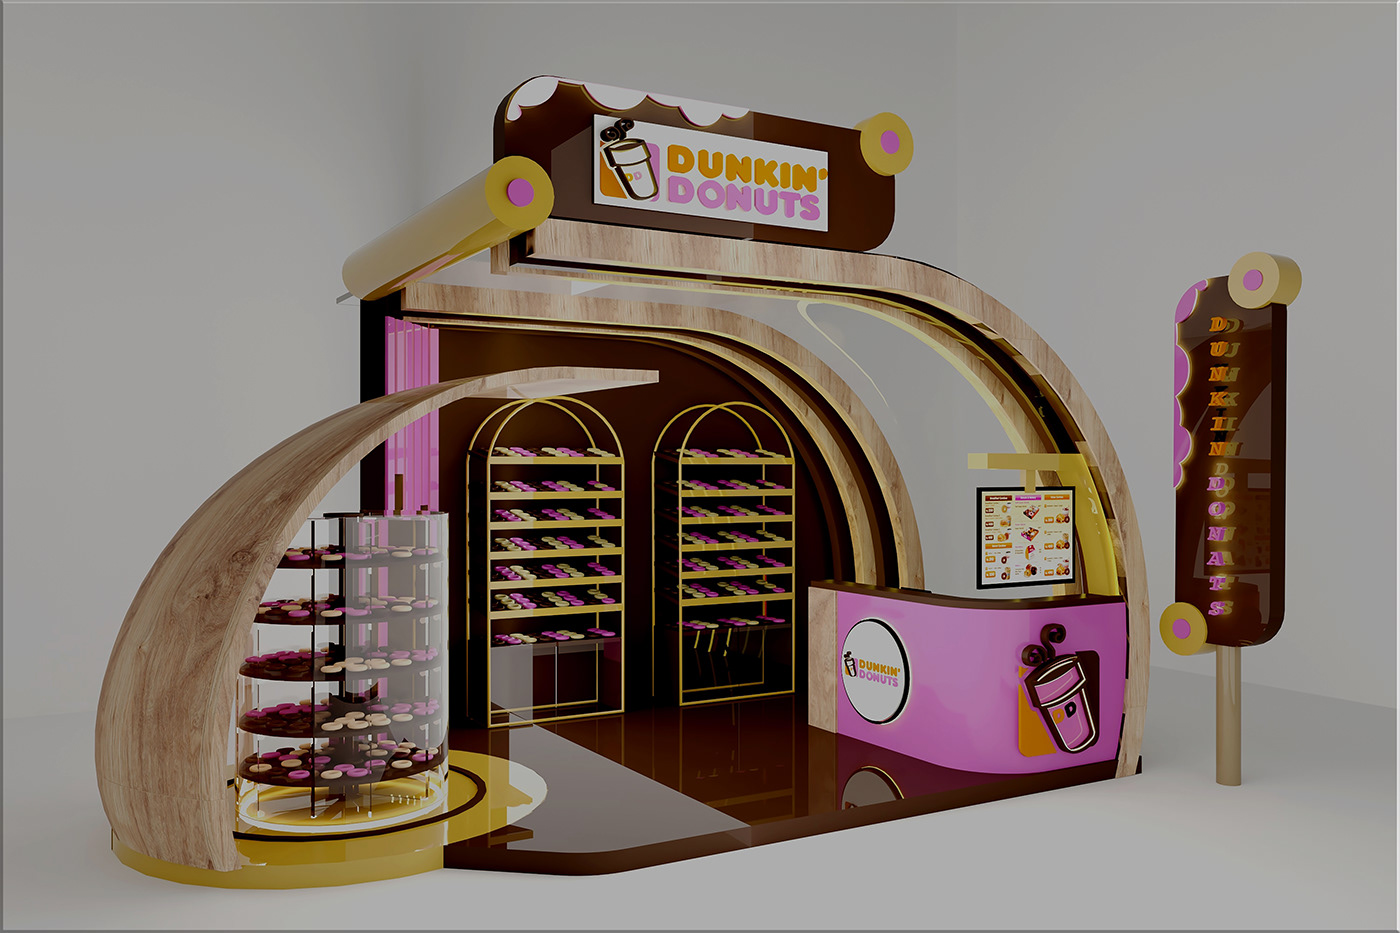 dunkirk donut sweet Donuts donut shop 3ds max Render vray Dunkin Donuts flavor